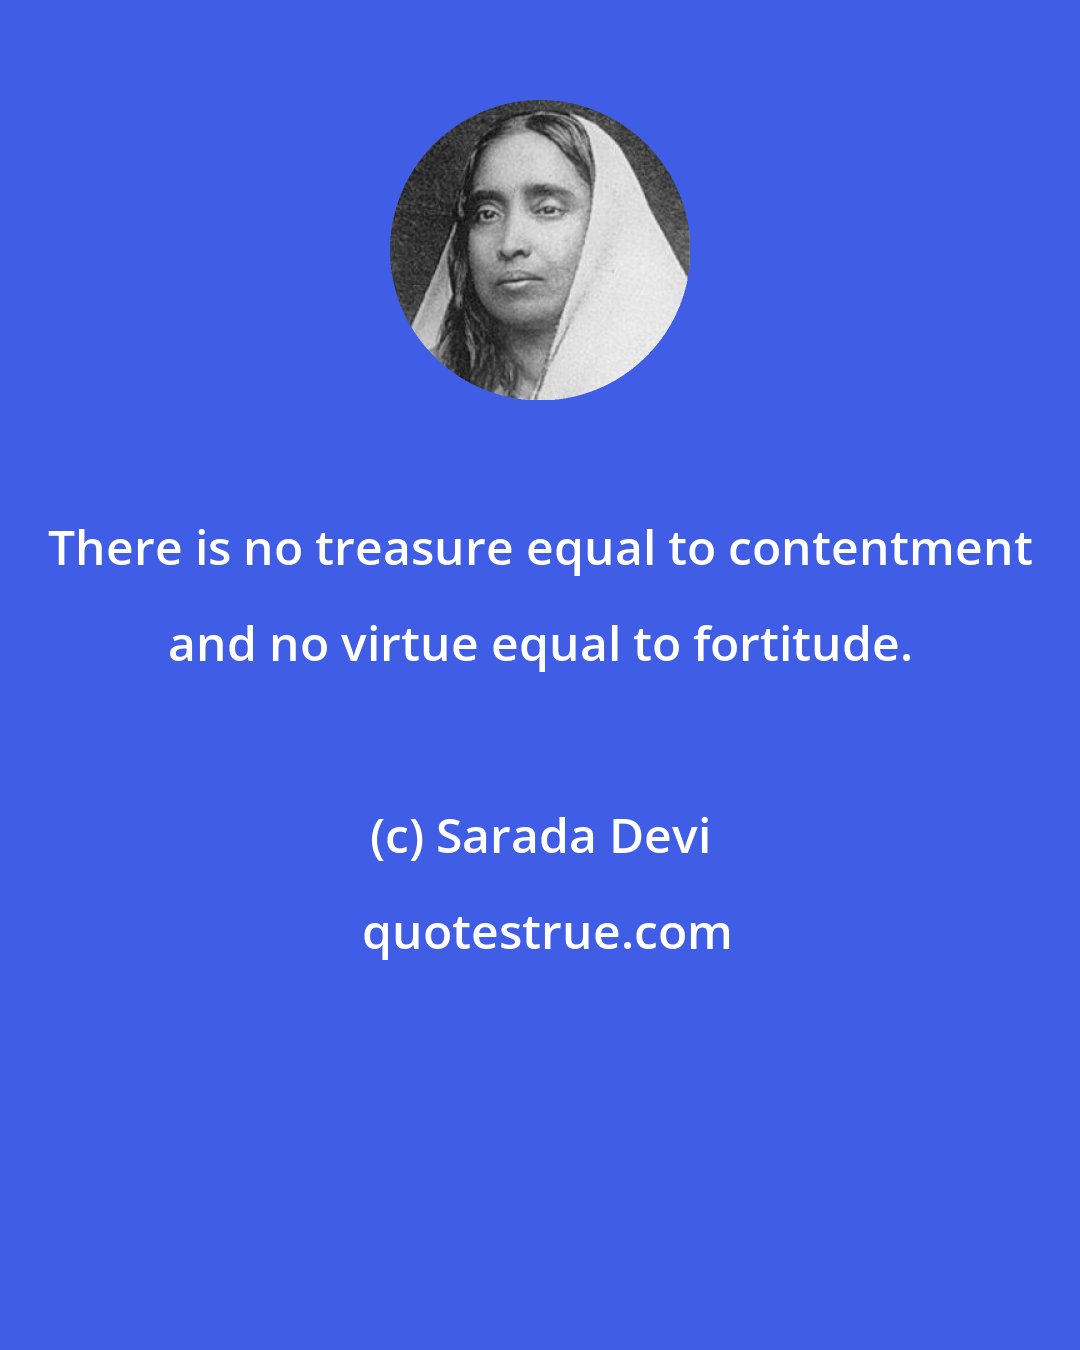 Sarada Devi: There is no treasure equal to contentment and no virtue equal to fortitude.